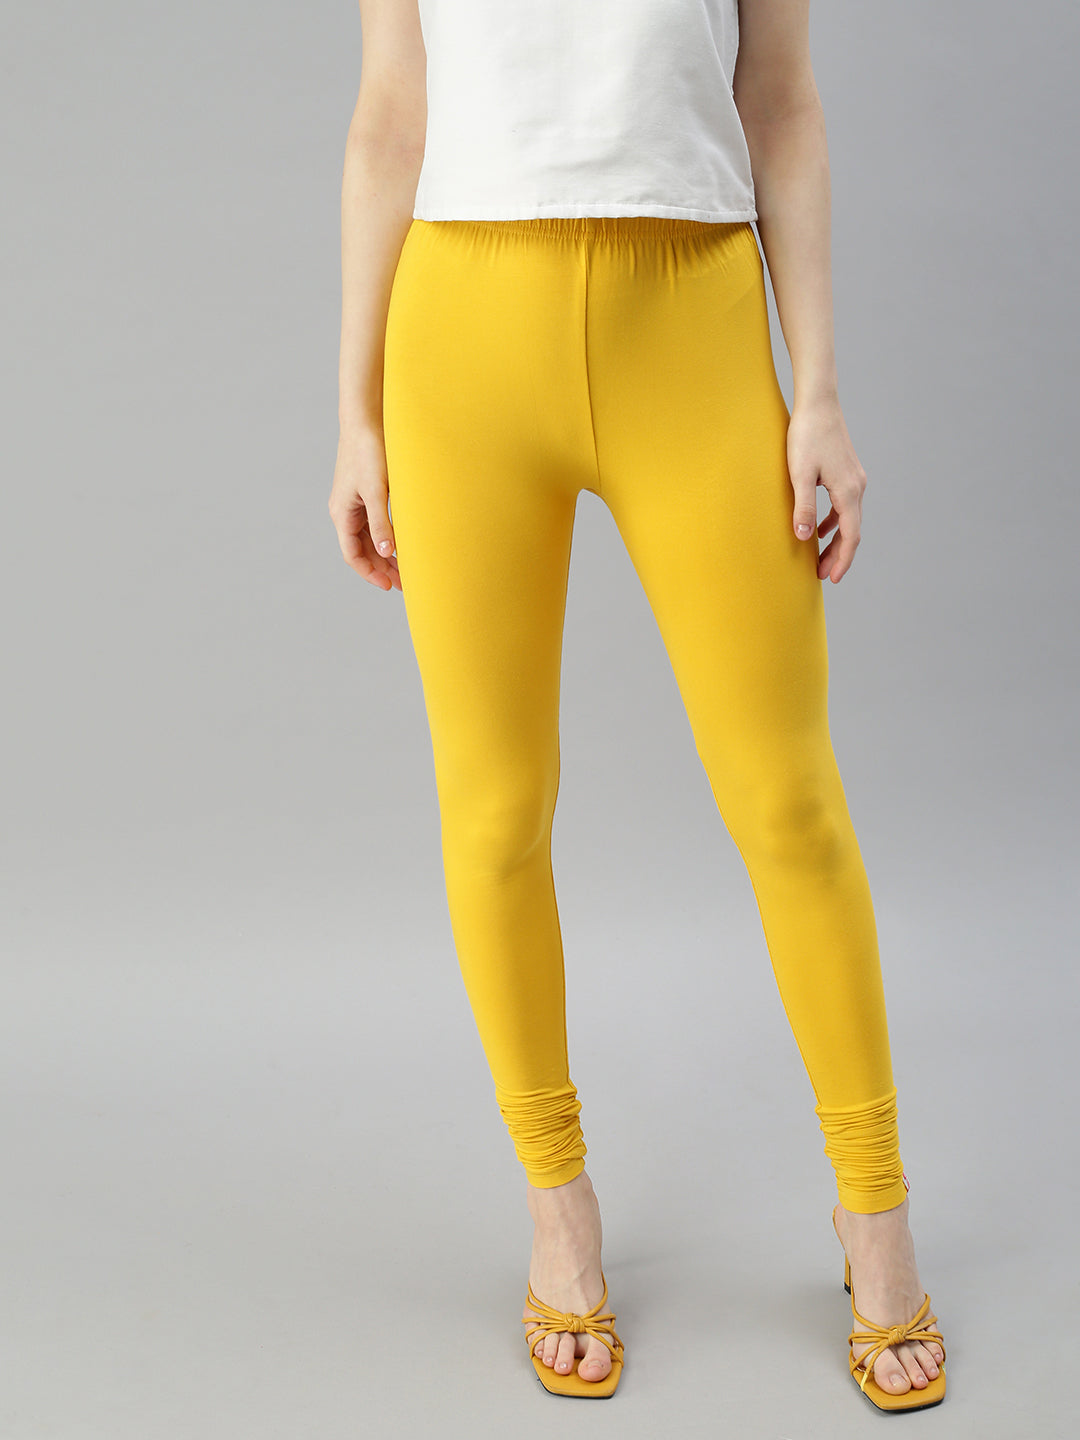 Gold Churidar Leggings by Prisma - Perfect for Any Occasion